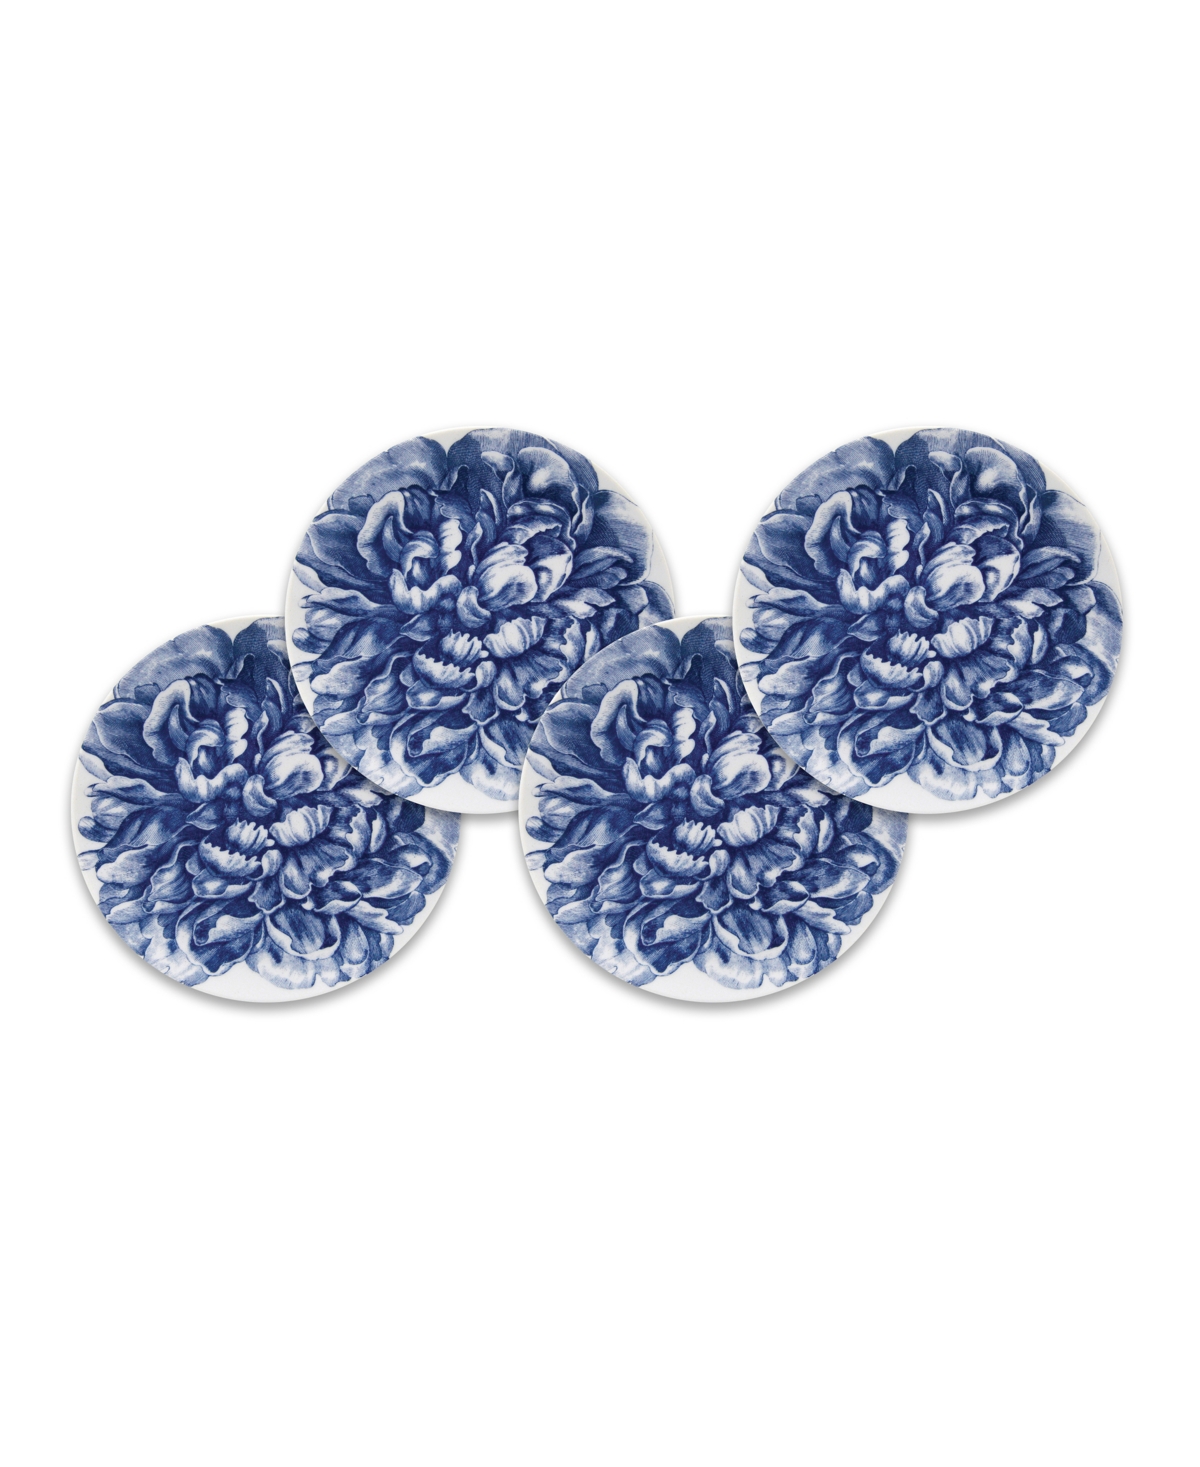 Peony Canape Plate, Set of 4 - Blue on White